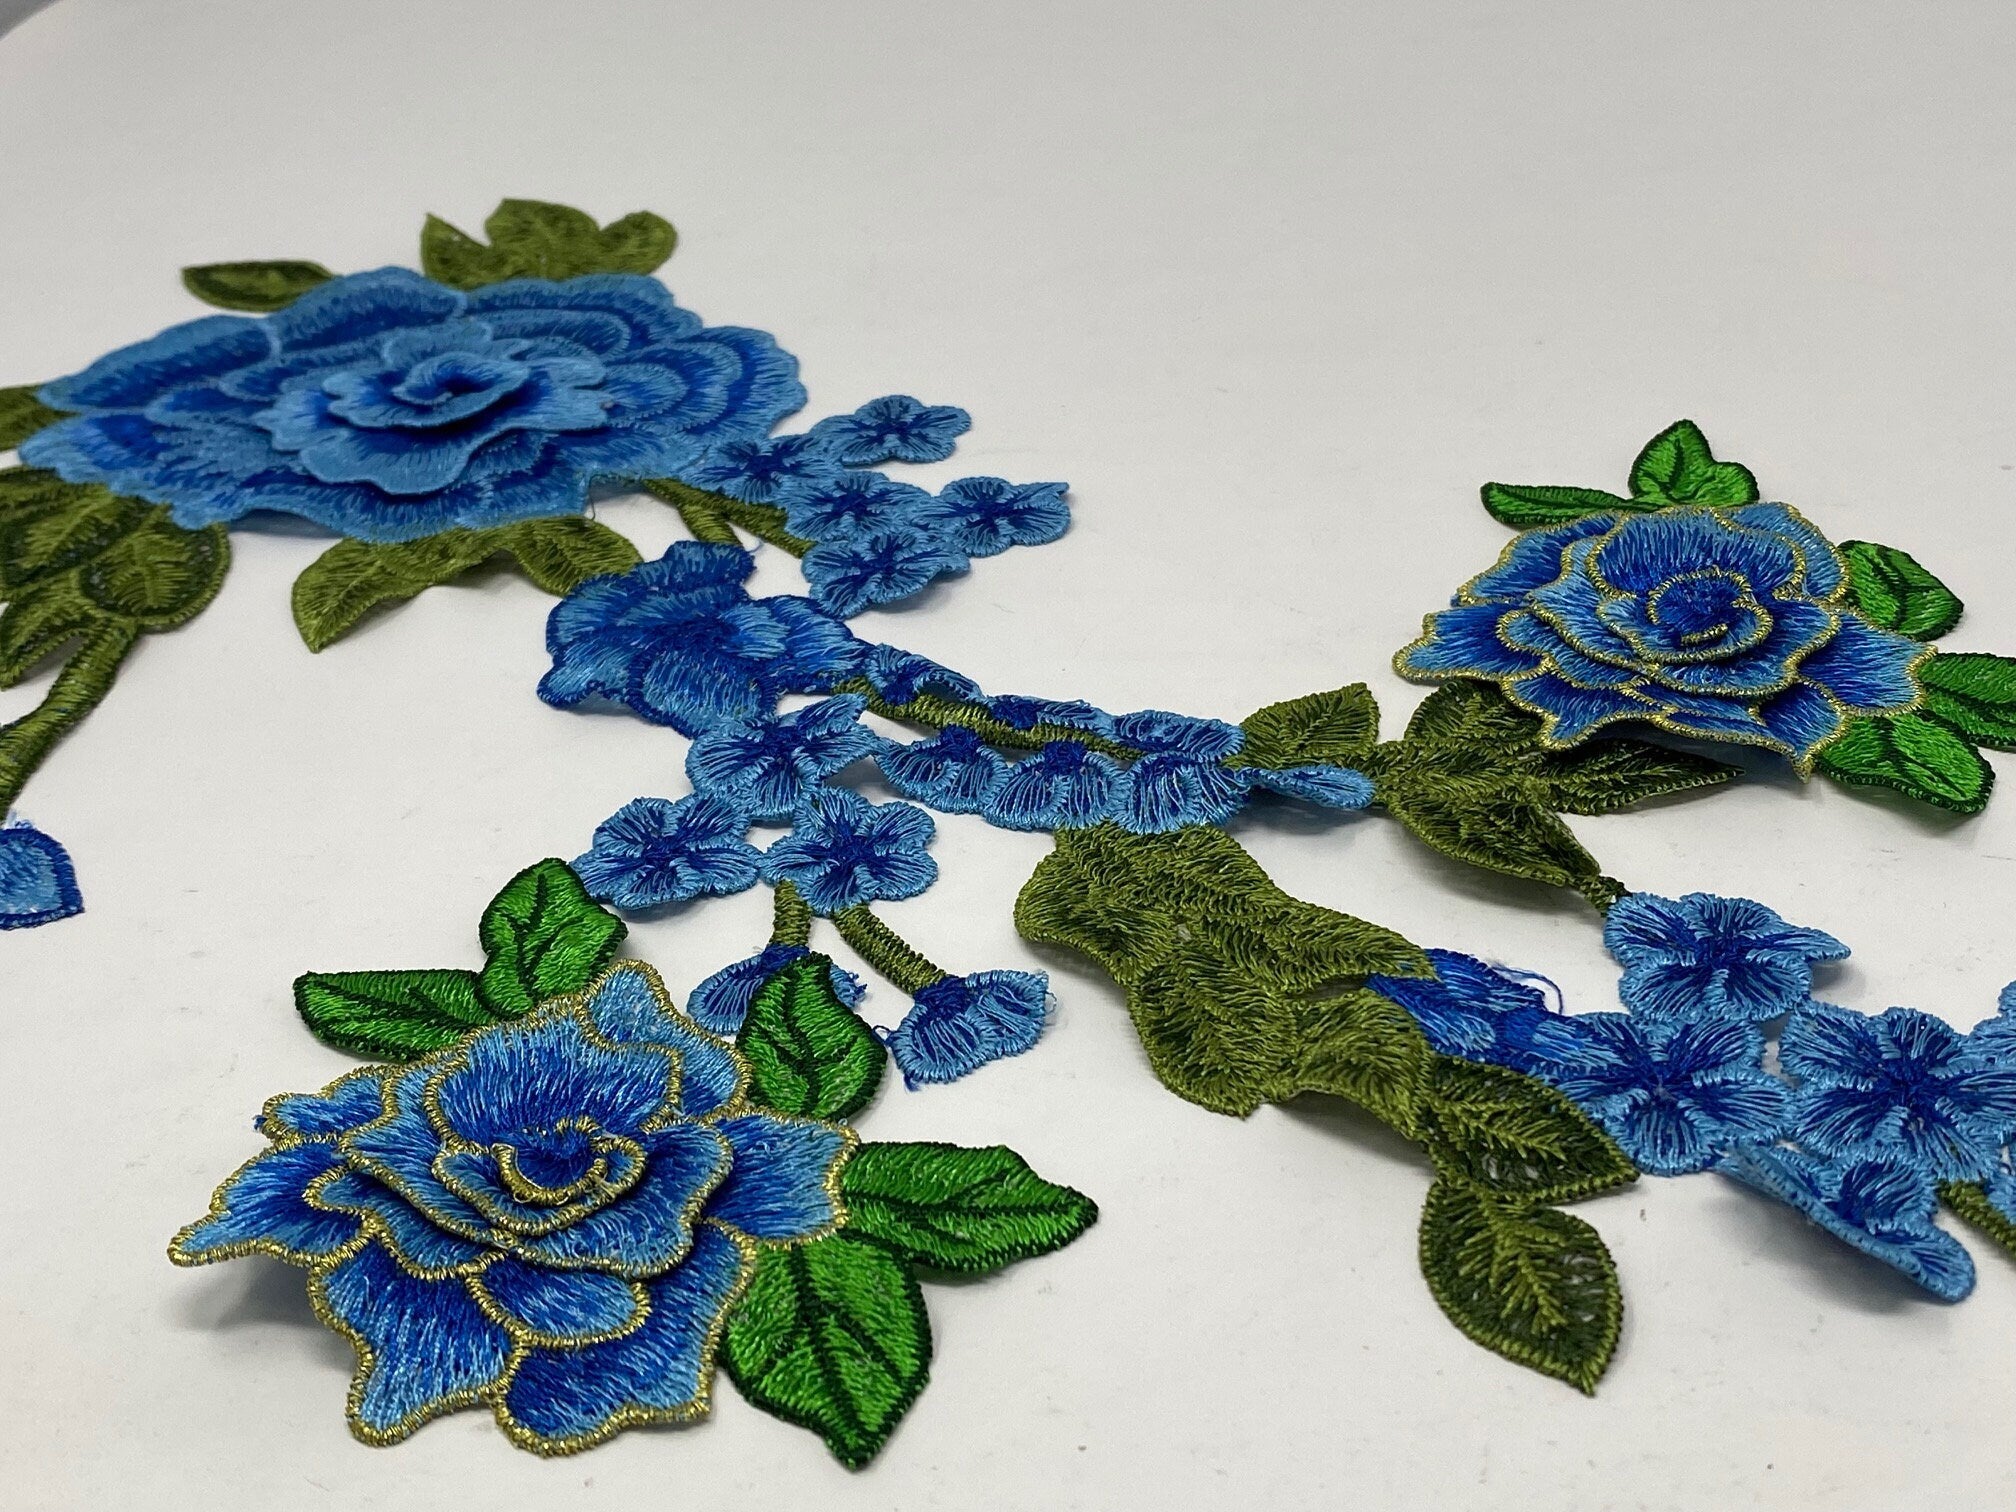 NEW, 2 Pc. 3D Blue Lace Flowers With Leaves and Stems, Sew-on Lace Flower Set, Great for Shoes, Denim, Jackets, Etc., Size 14 inches